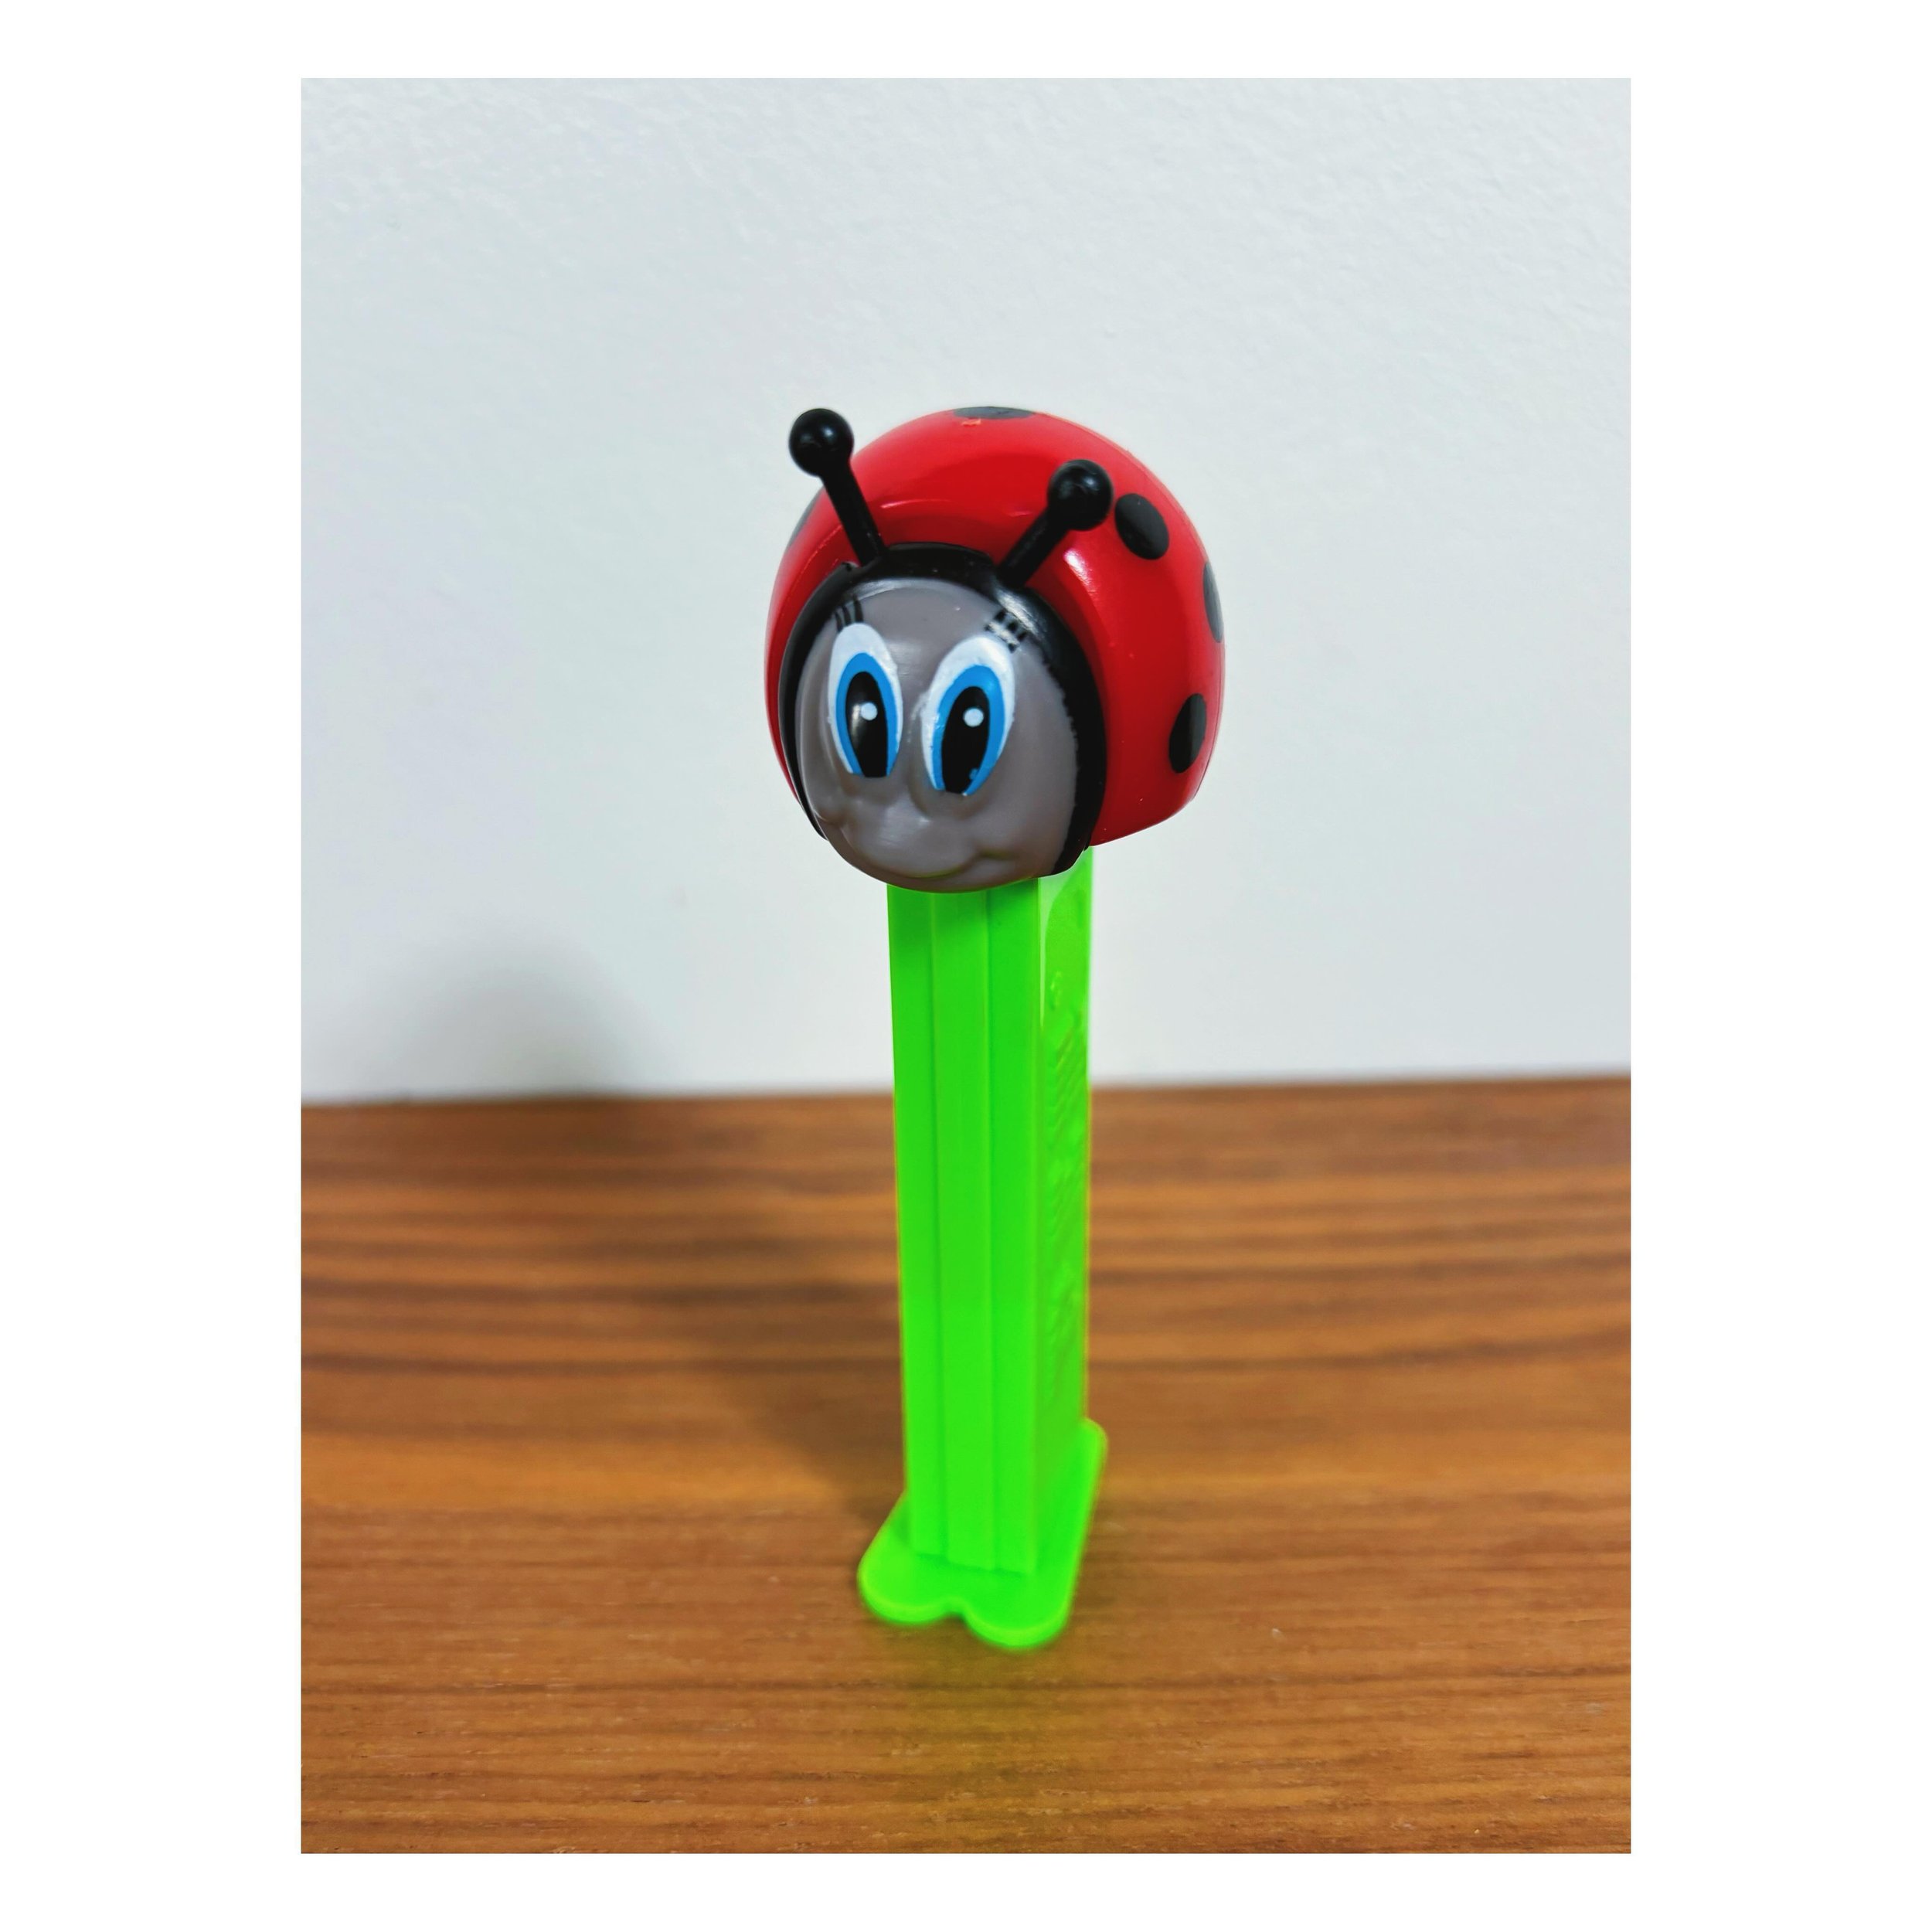 Is that Morphine Love Dion? 🐞
.
.
#pez #pezdispenser #candy #ladybug